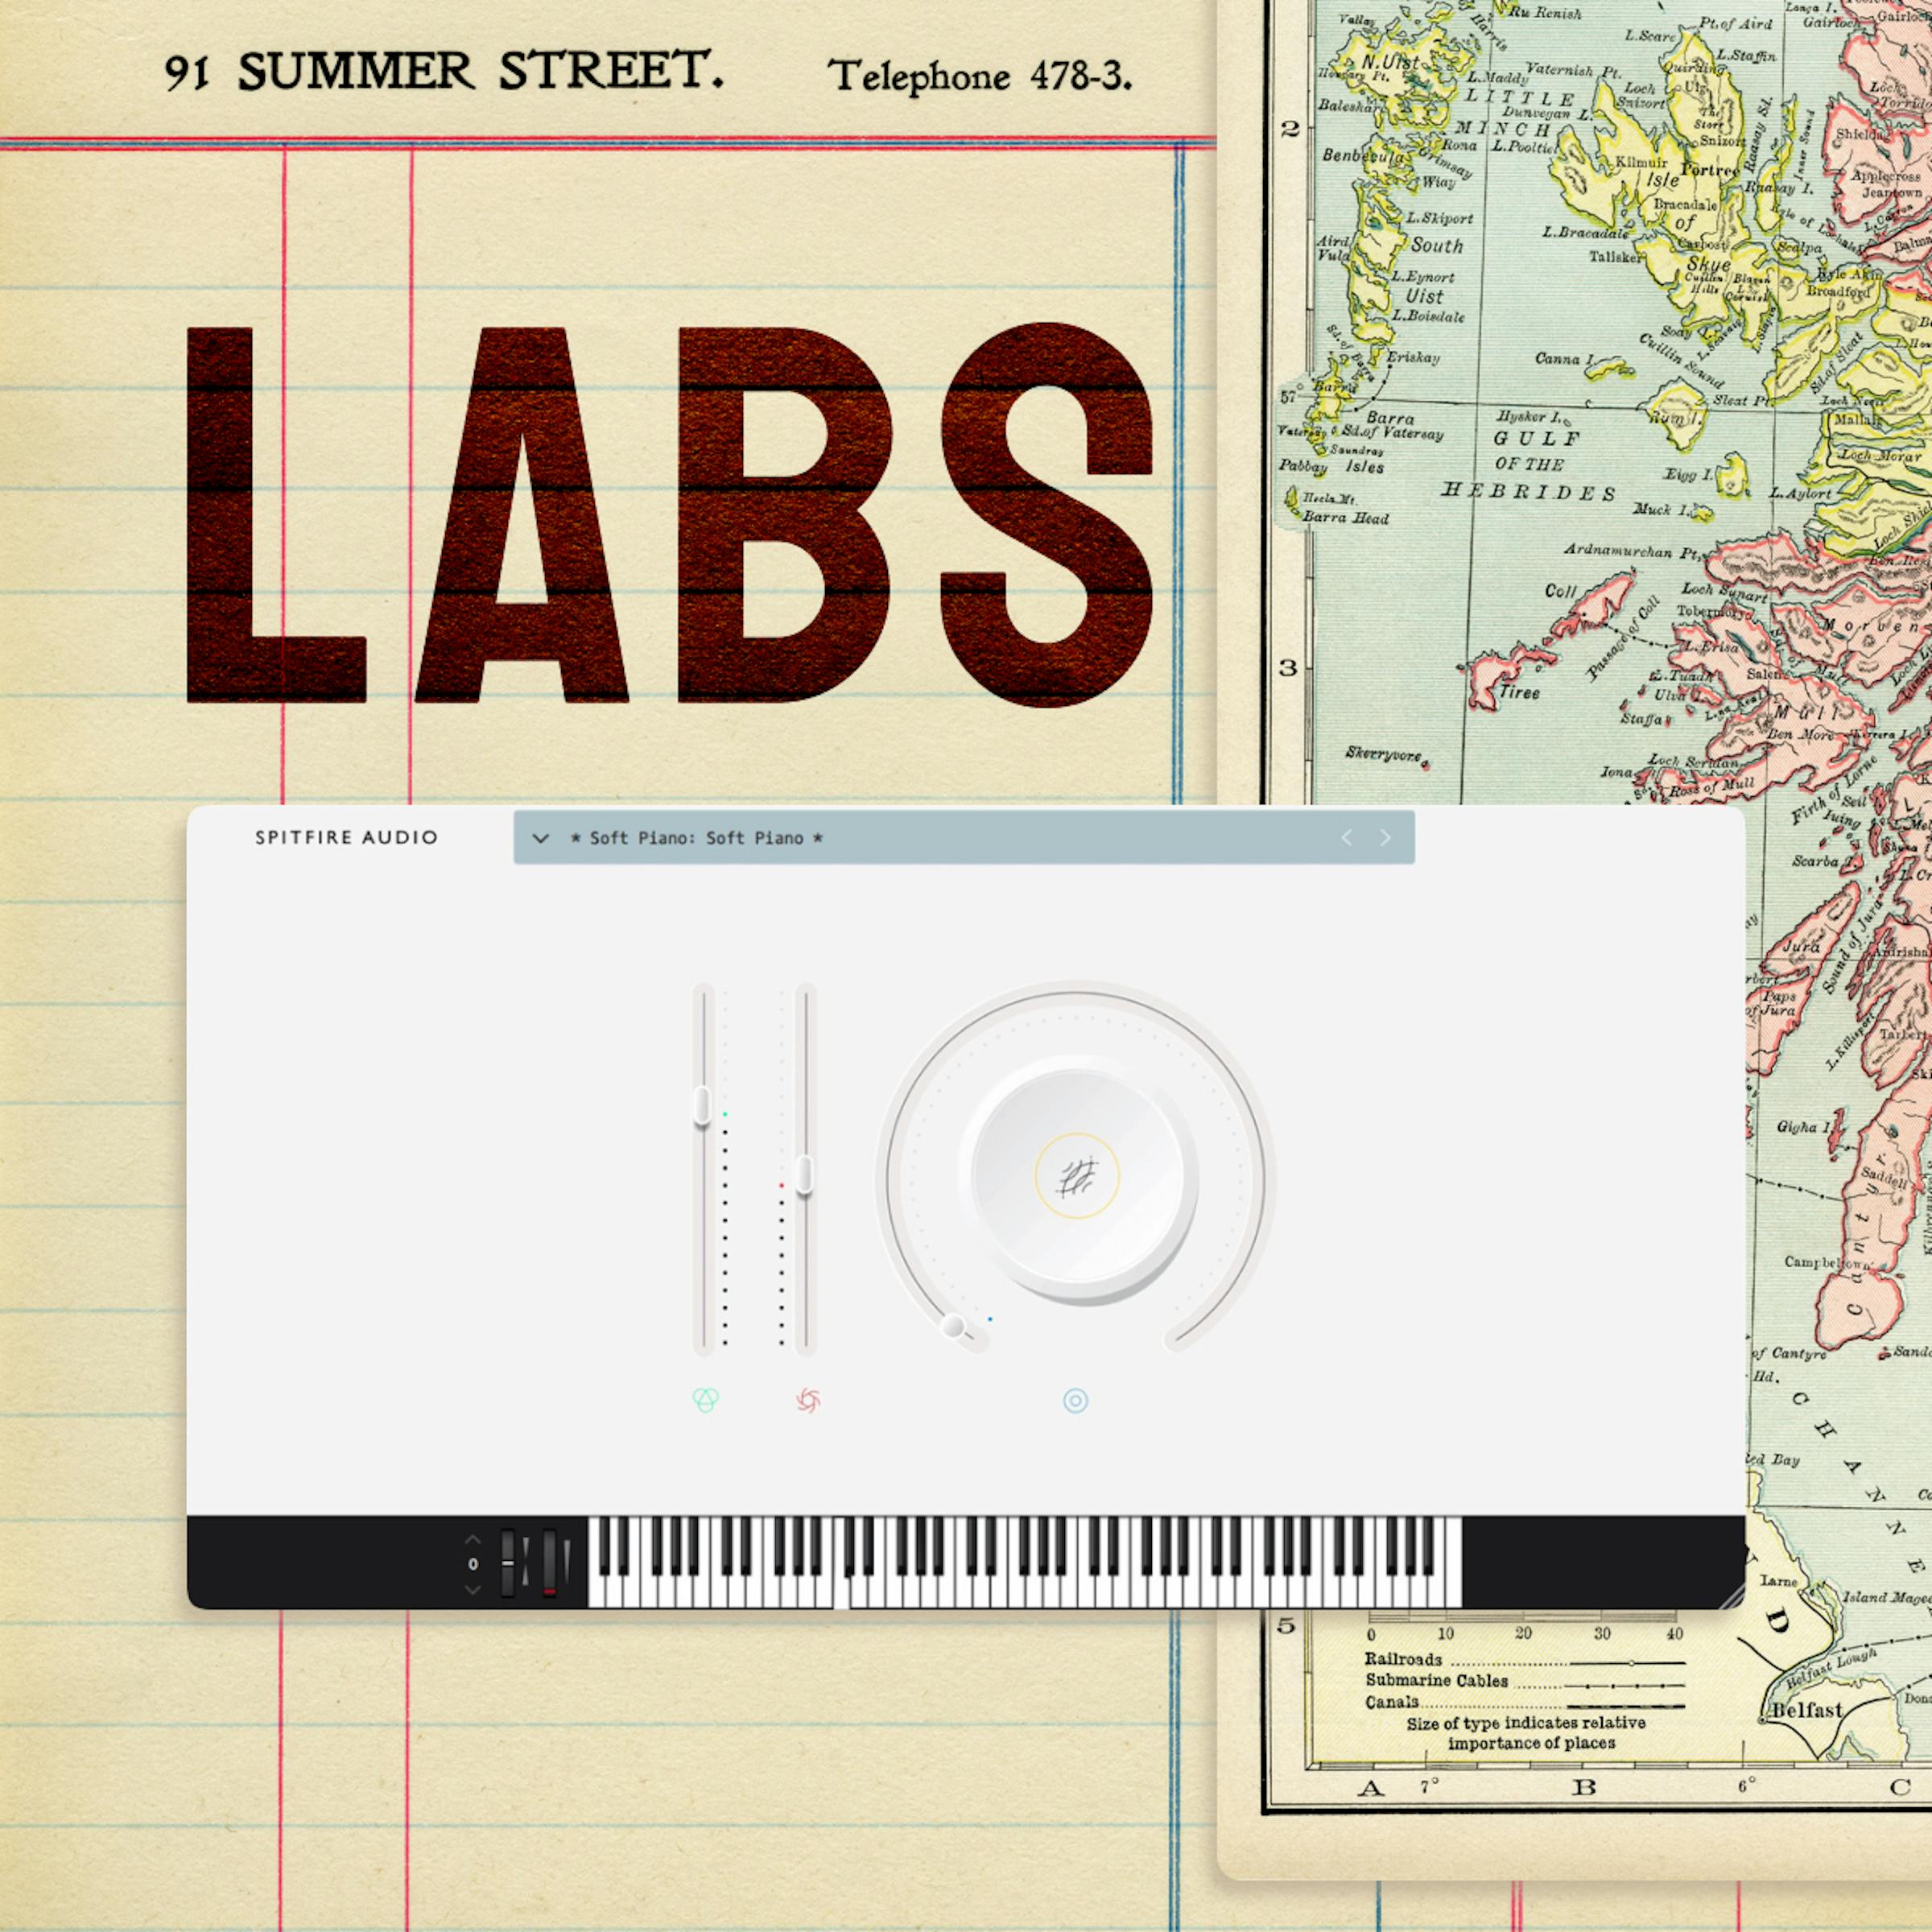 LABS logo and GUI over old fashioned map